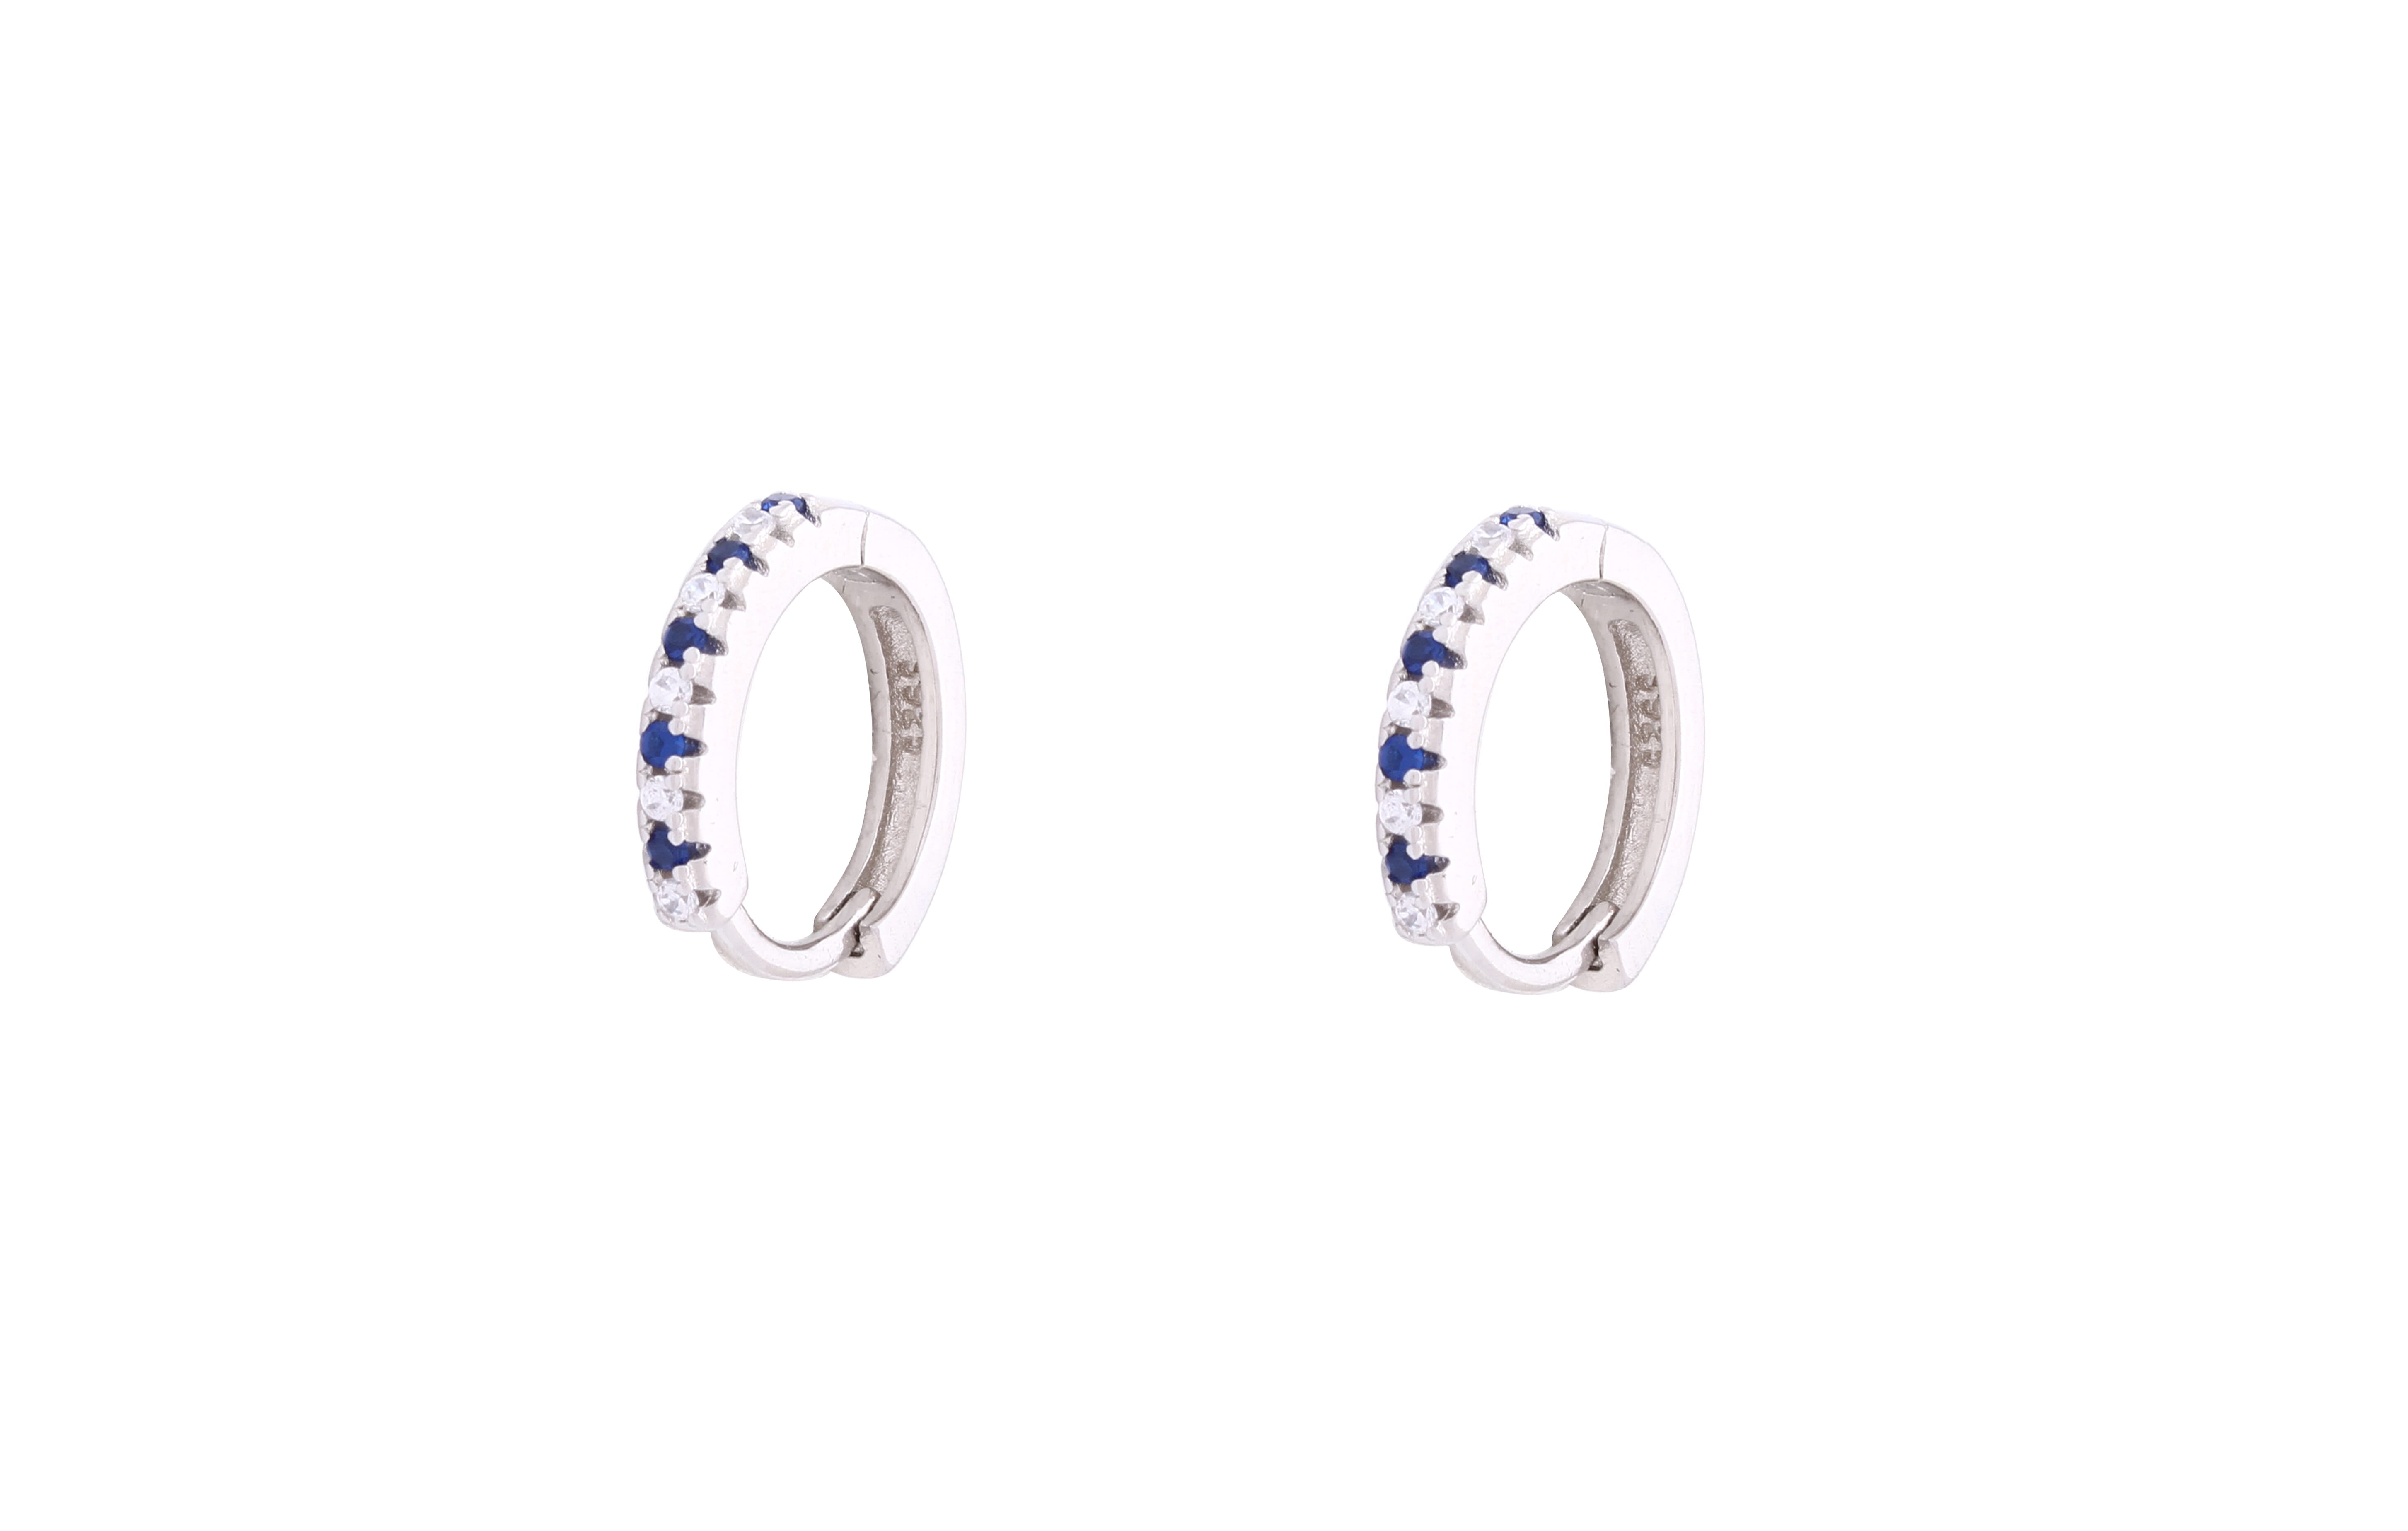 Asfour Crystal Hoop Earrings With Blue & Clear Stones In 925 Sterling Siver ER0391-BW